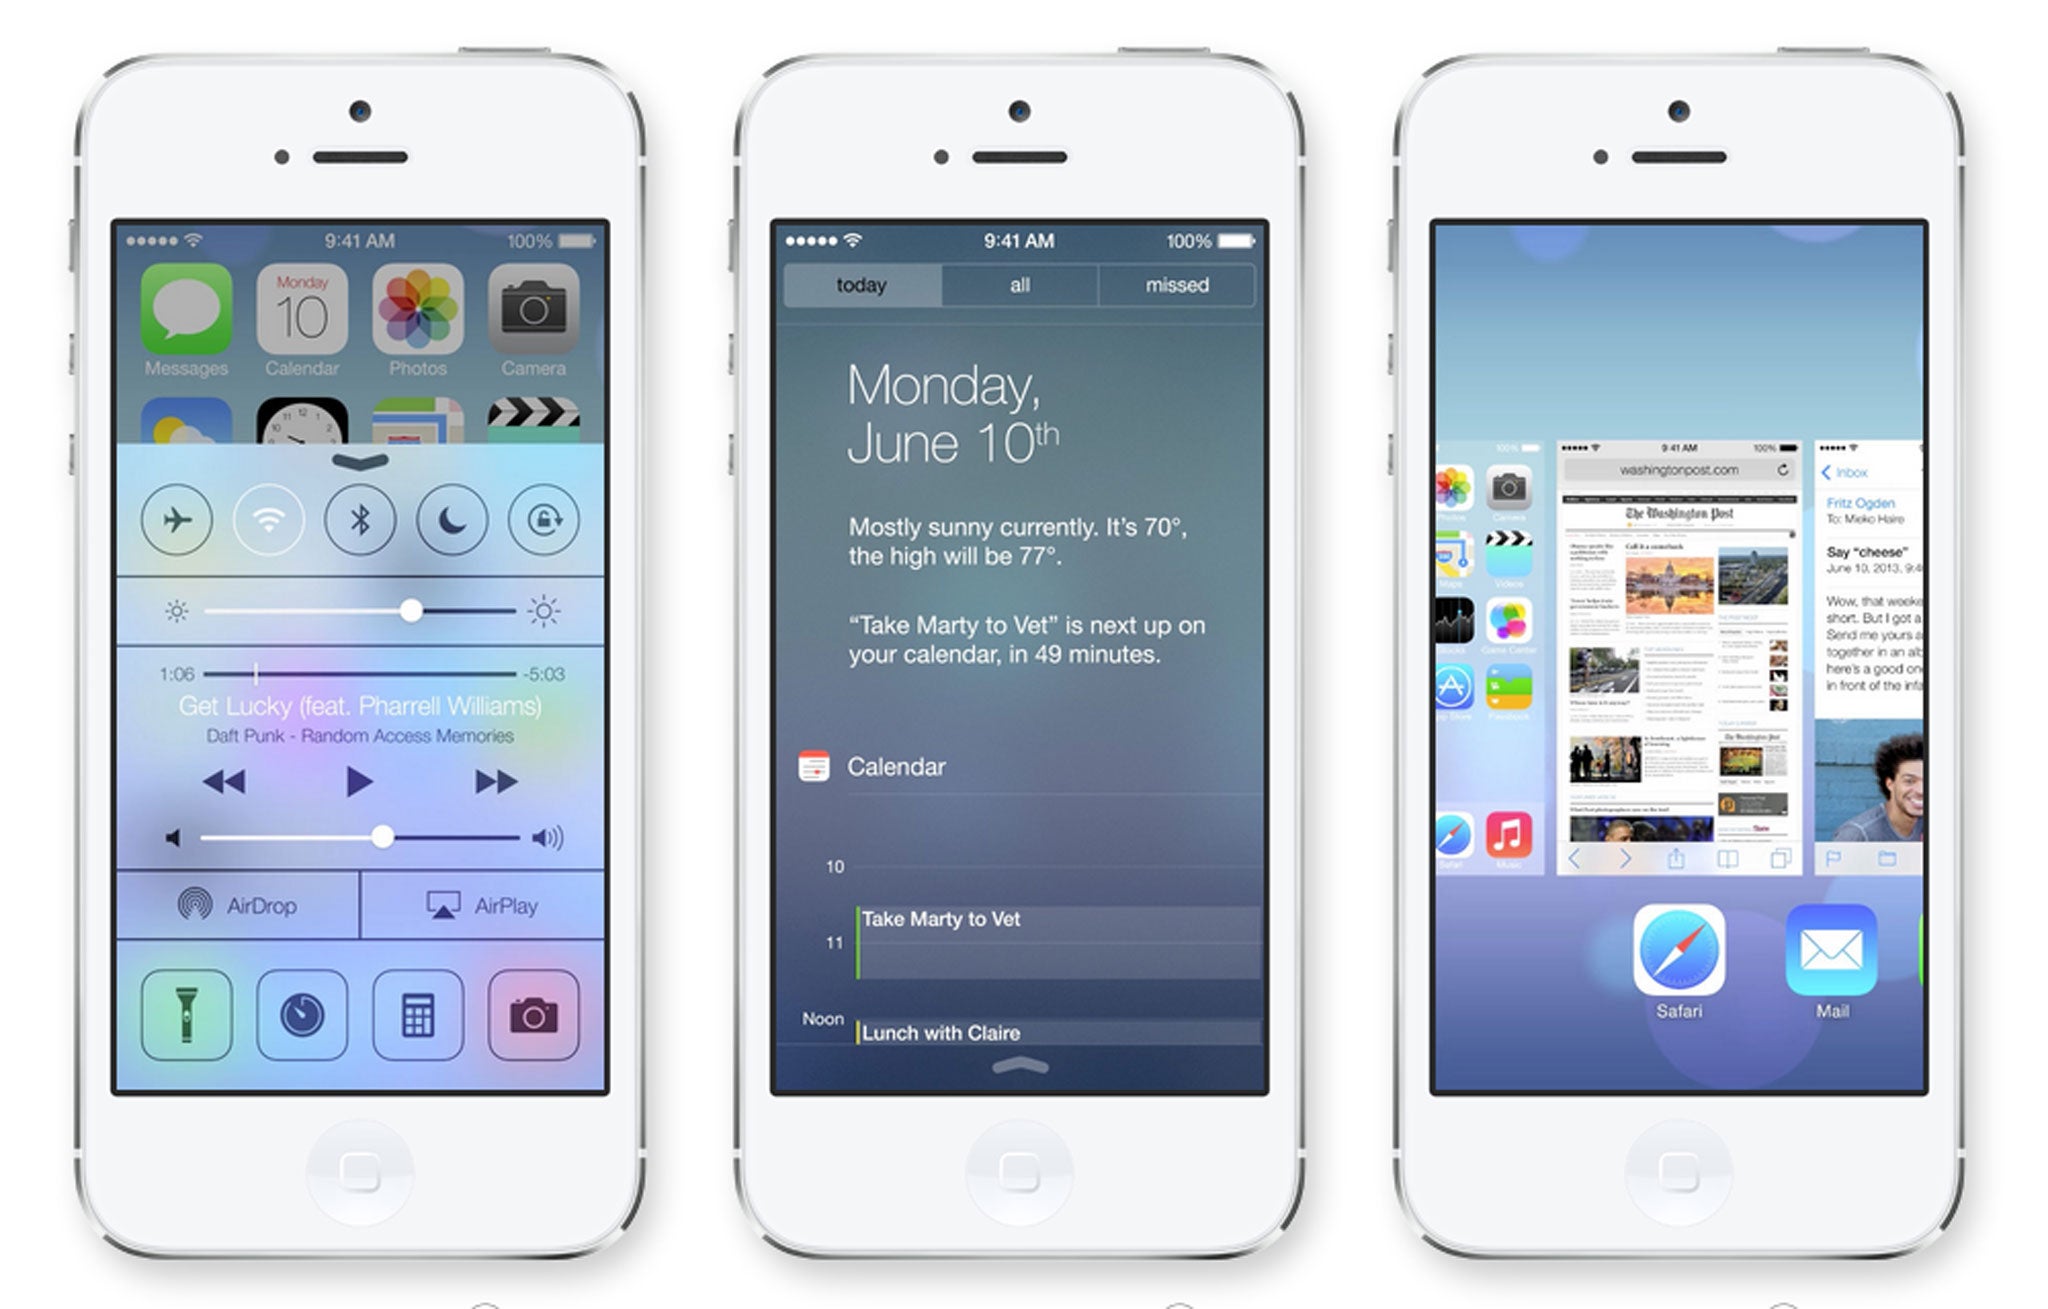 Apple shows off its new iOS 7